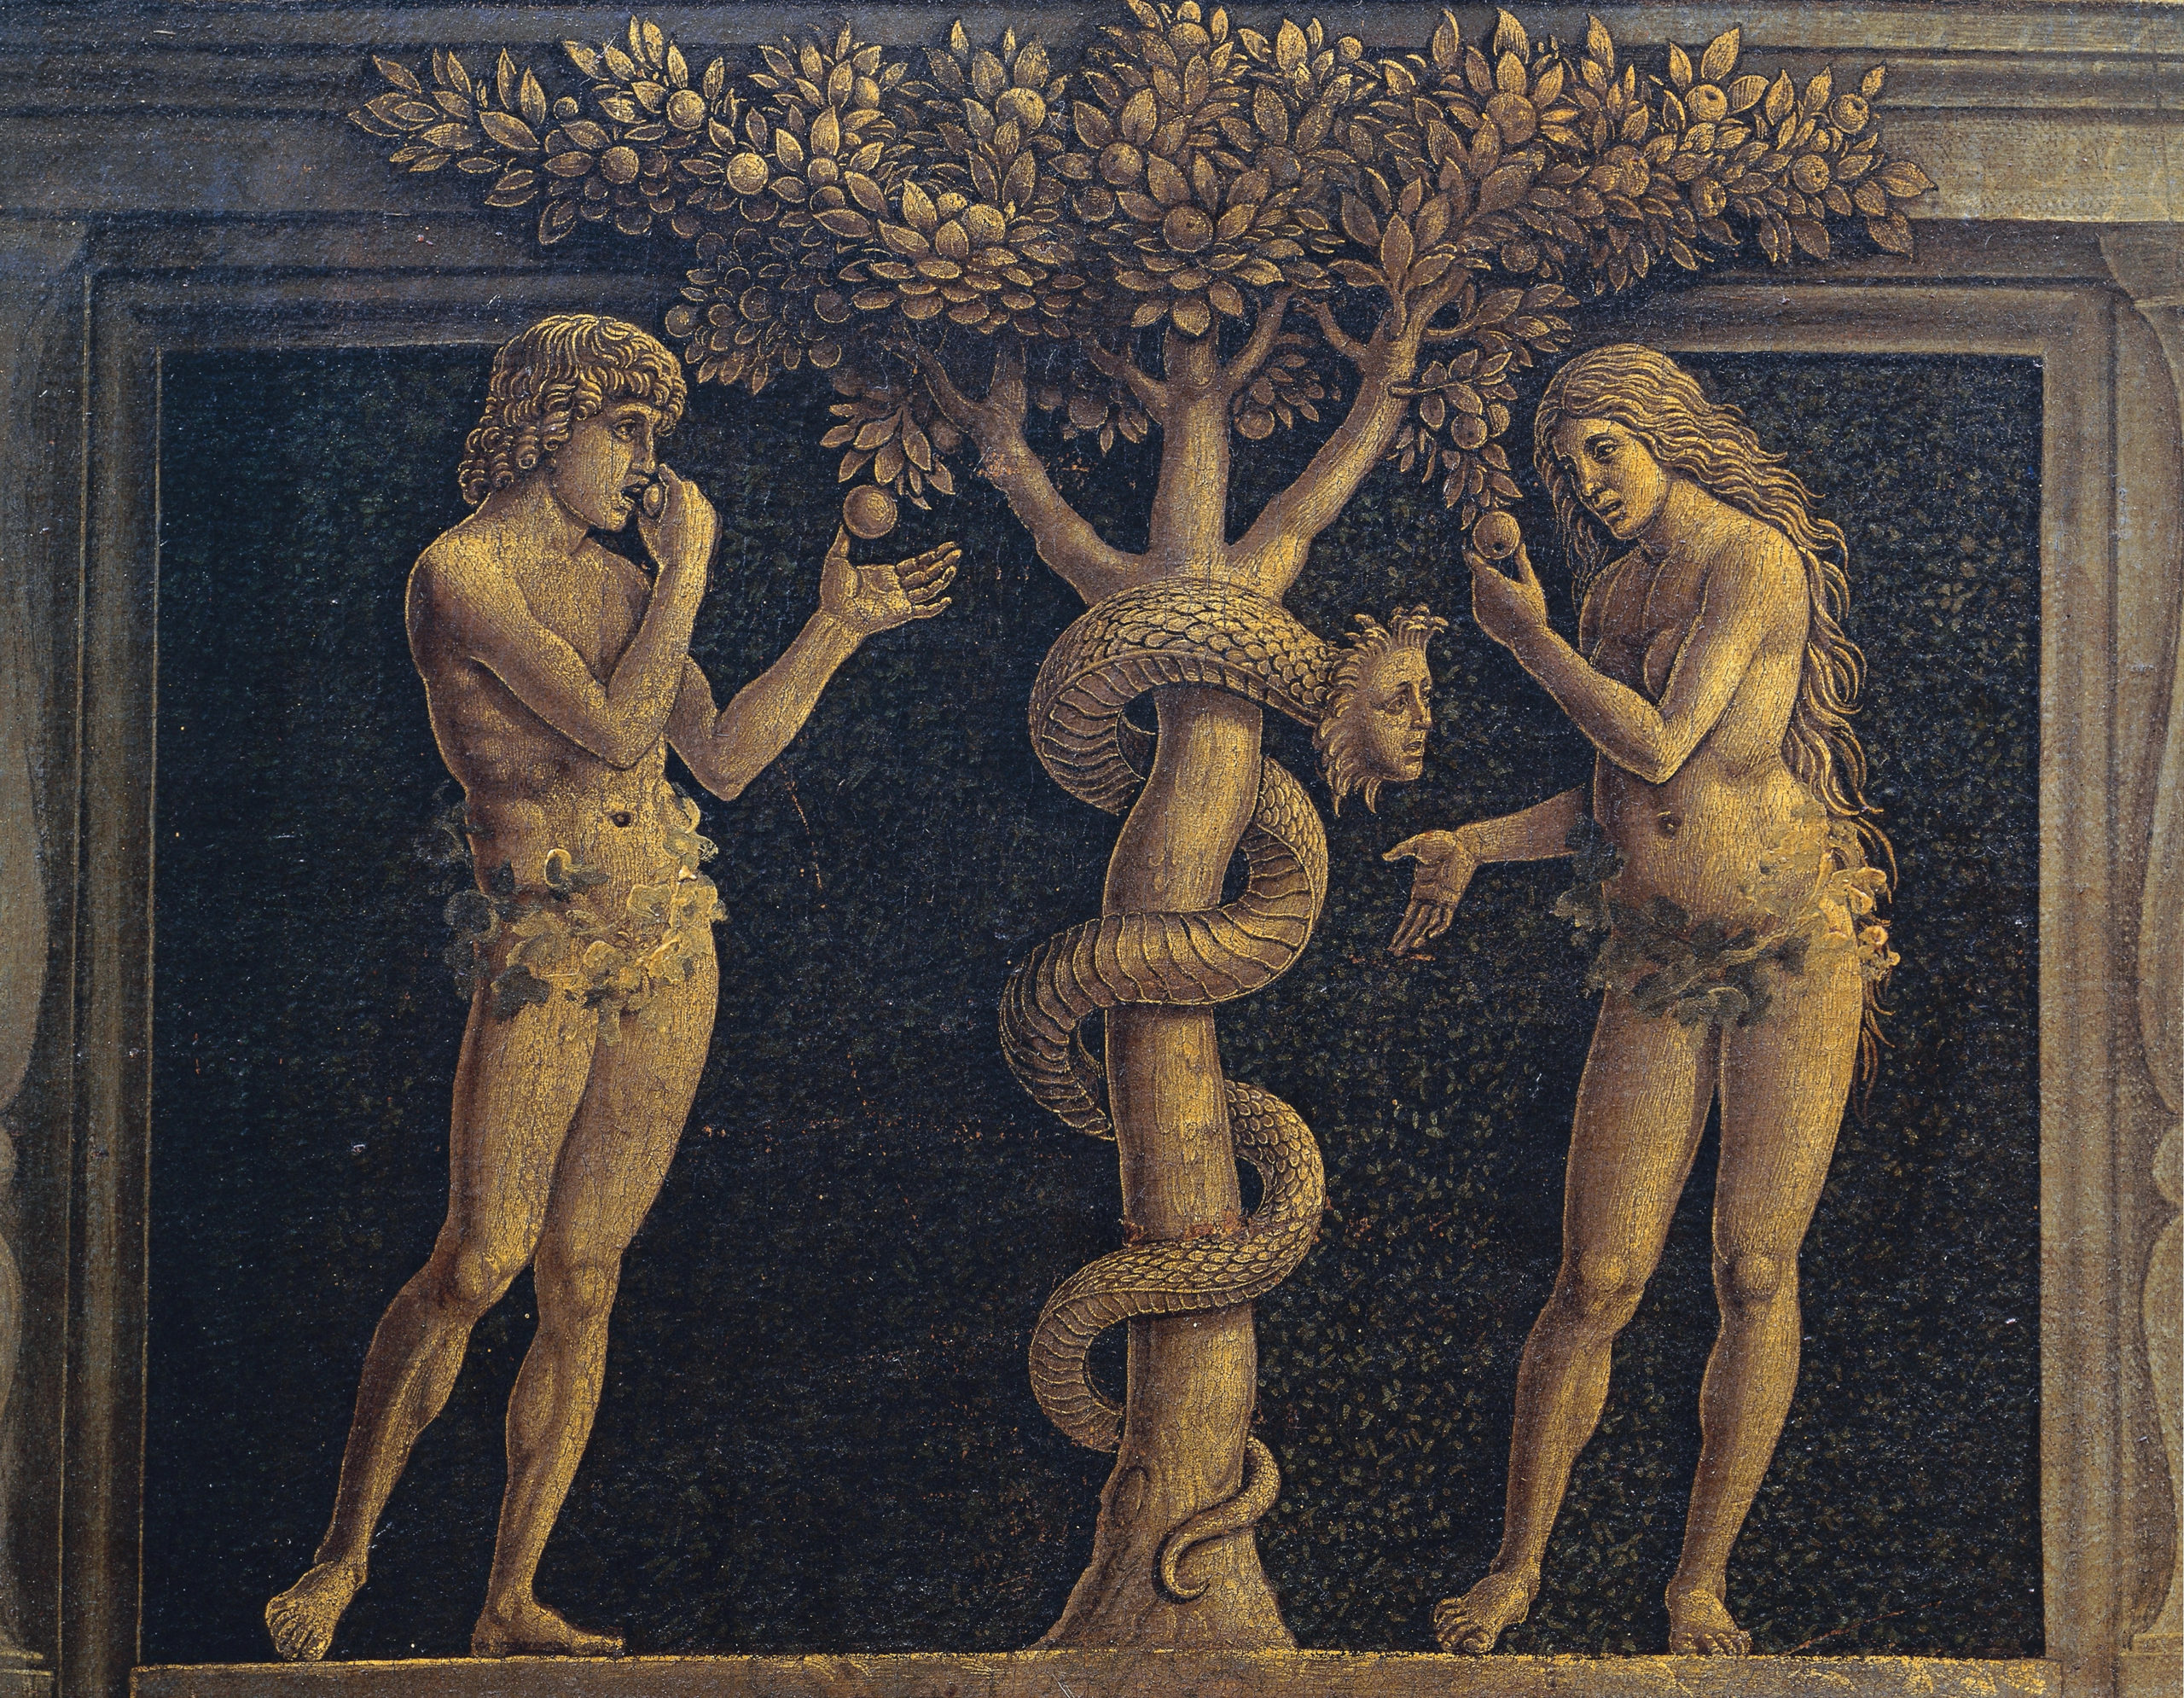 Adam and Eve committing original sin, detail from Virgin of Victory, 1496, by Andrea Mantegna (1431-1506), tempera on canvas, 280x166 cm